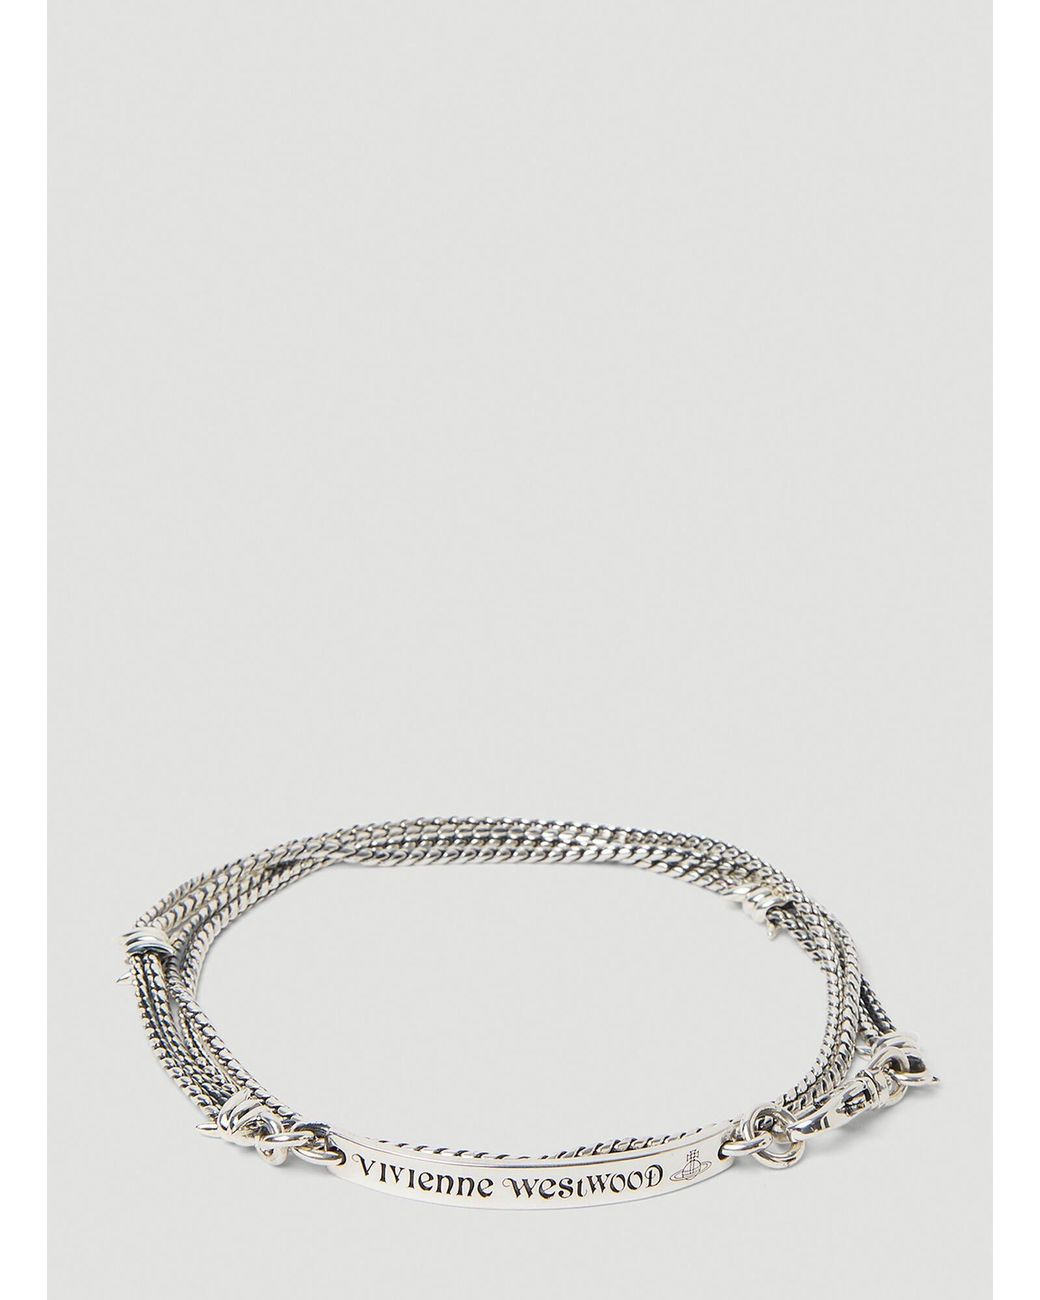 Vivienne Westwood Lucianne Choker Necklace in Natural | Lyst